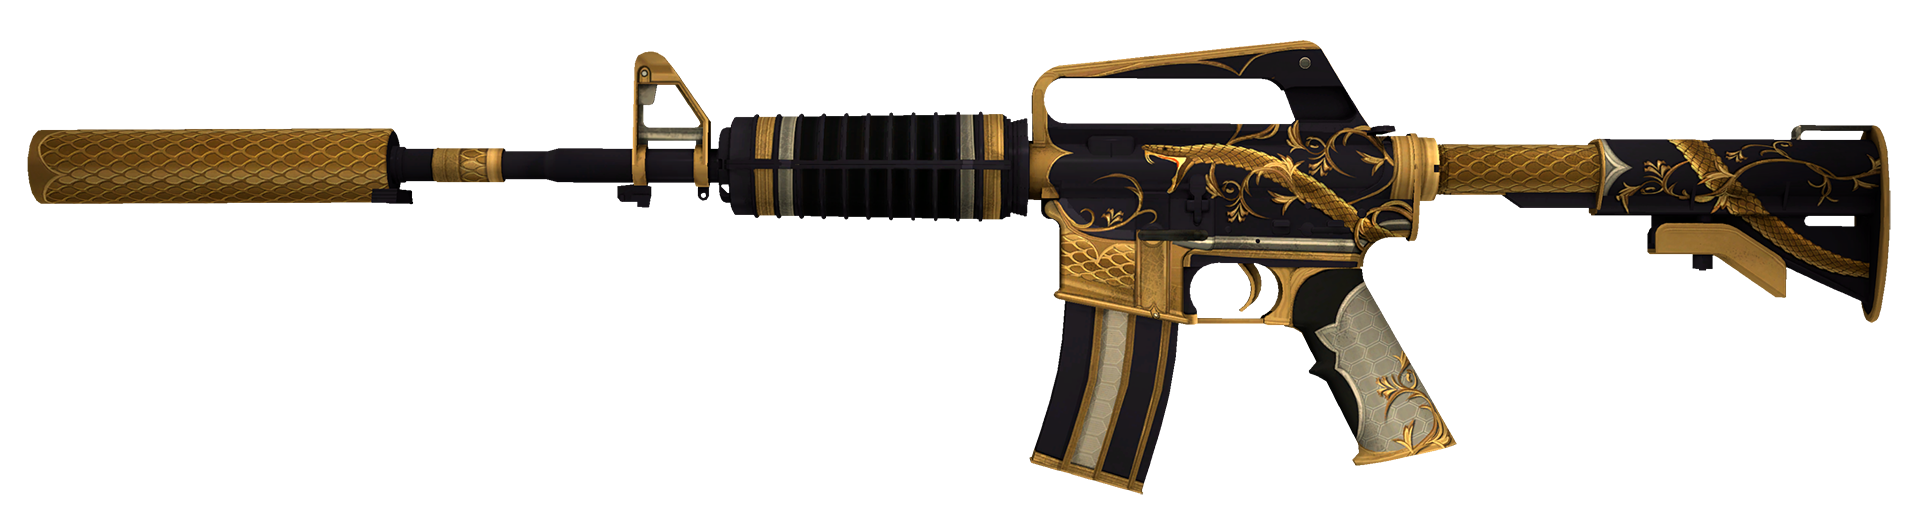 M4A1-S Golden Coil Large Rendering